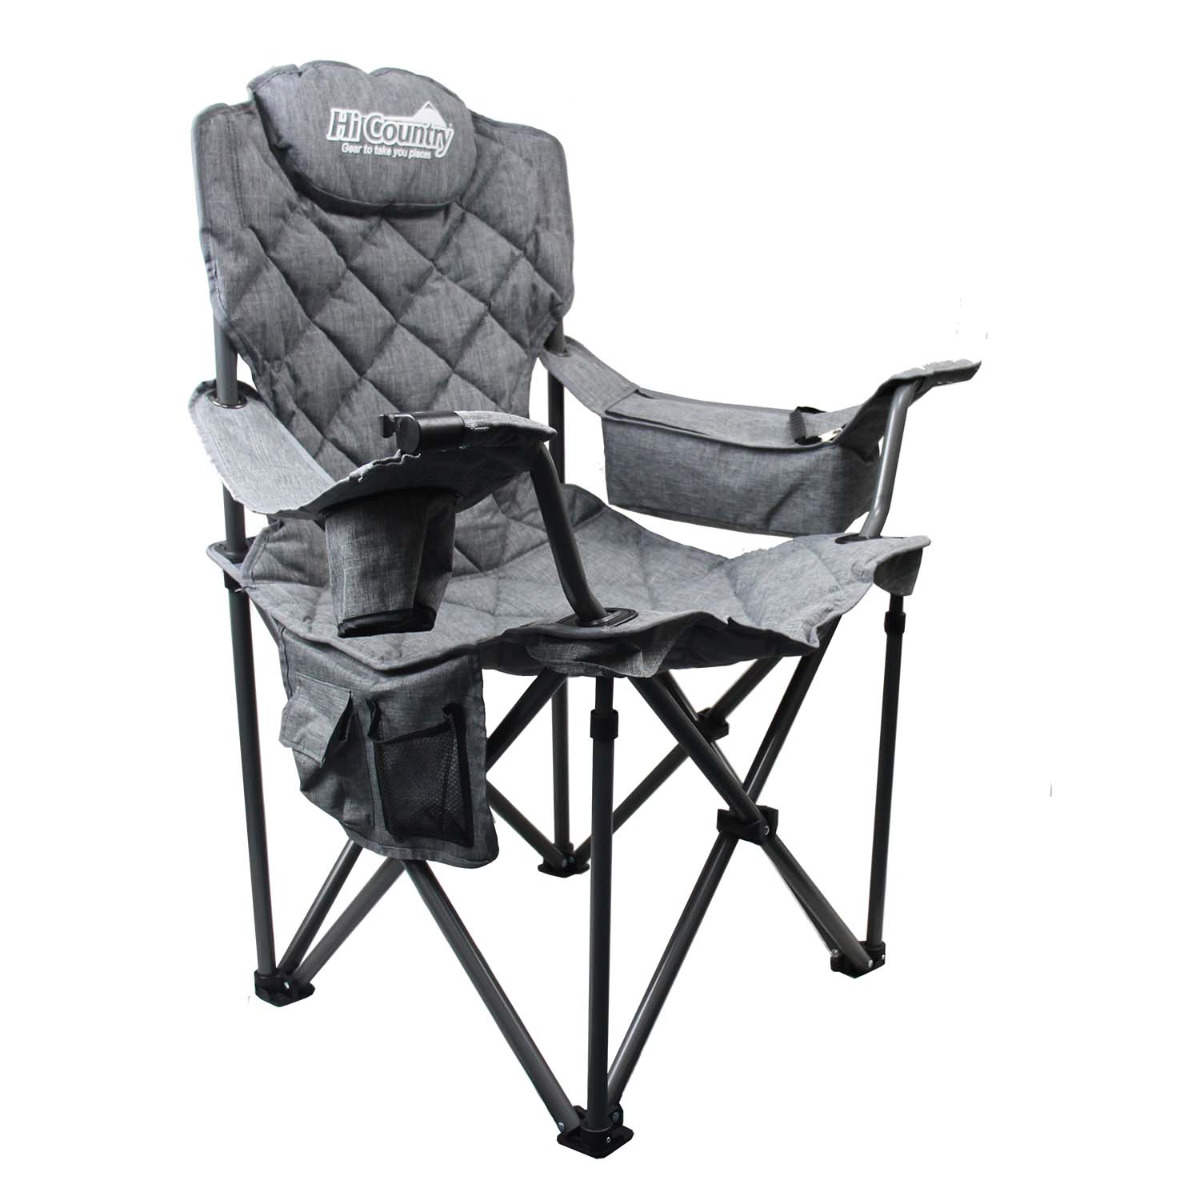 Hi-Country Deluxe Executive Resort Chair